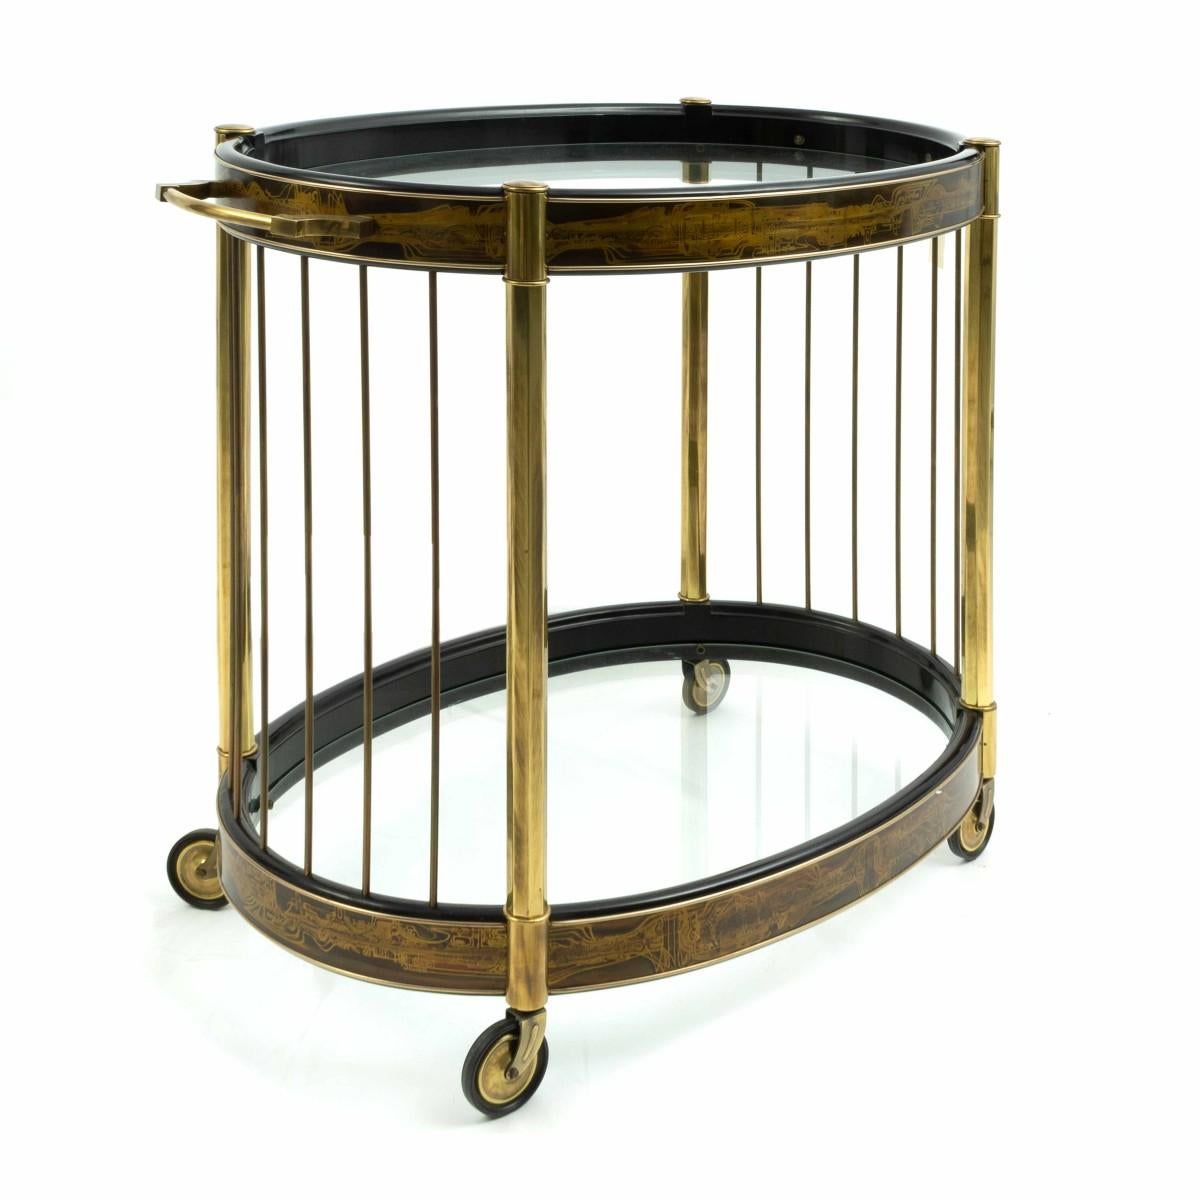 Mid-Century Modern Bernhard Rohne two-tier brass serving / bar cart made by Mastercraft with acid etched details and black lacquered wood with oval glass surfaces.
 